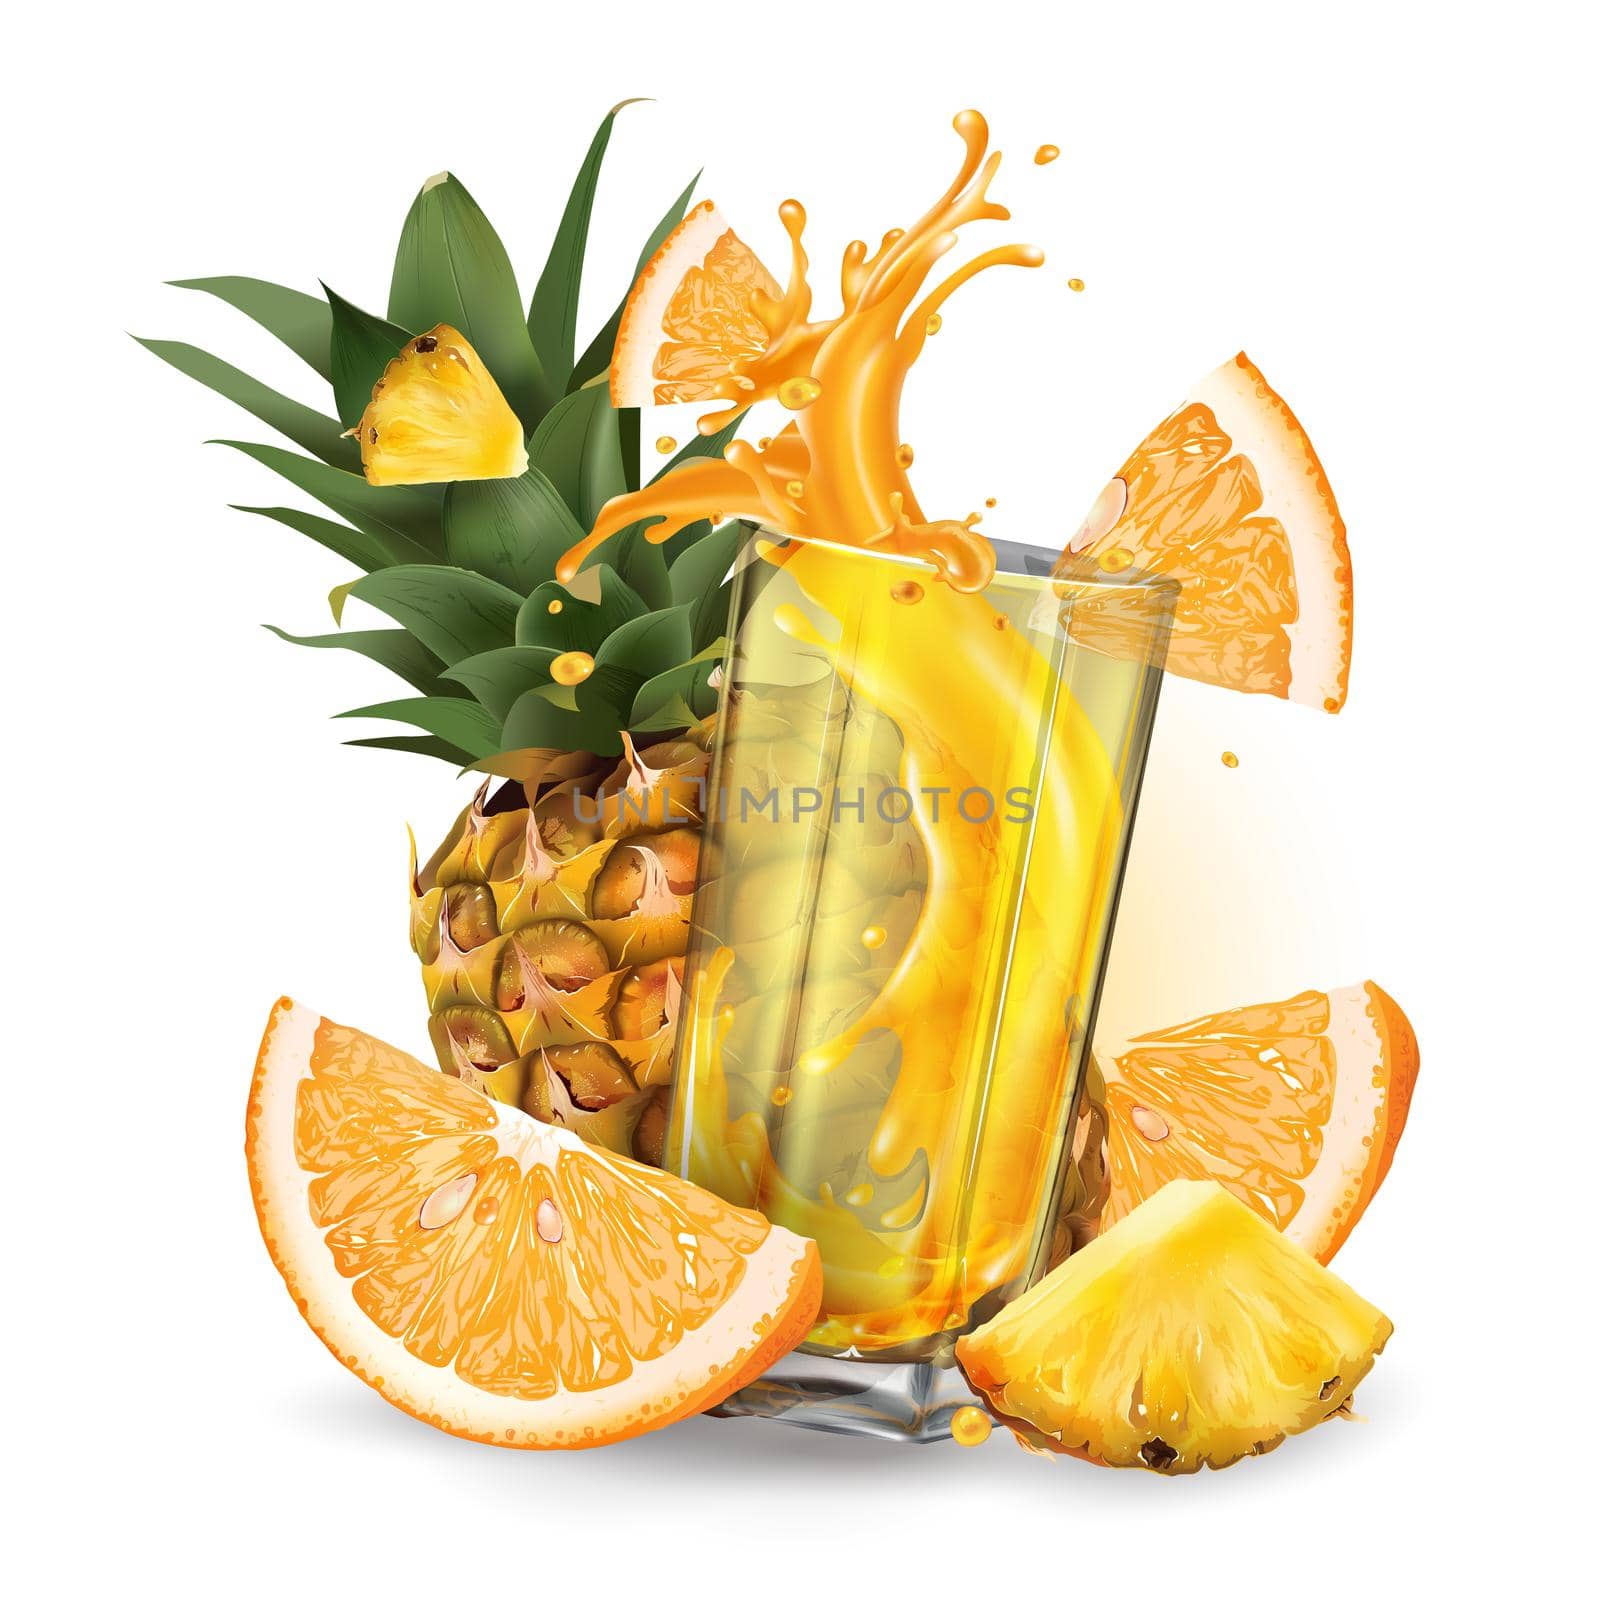 Composition of orange, pineapple and a glass with a dynamic splash of fruit juice. Realistic style illustration.